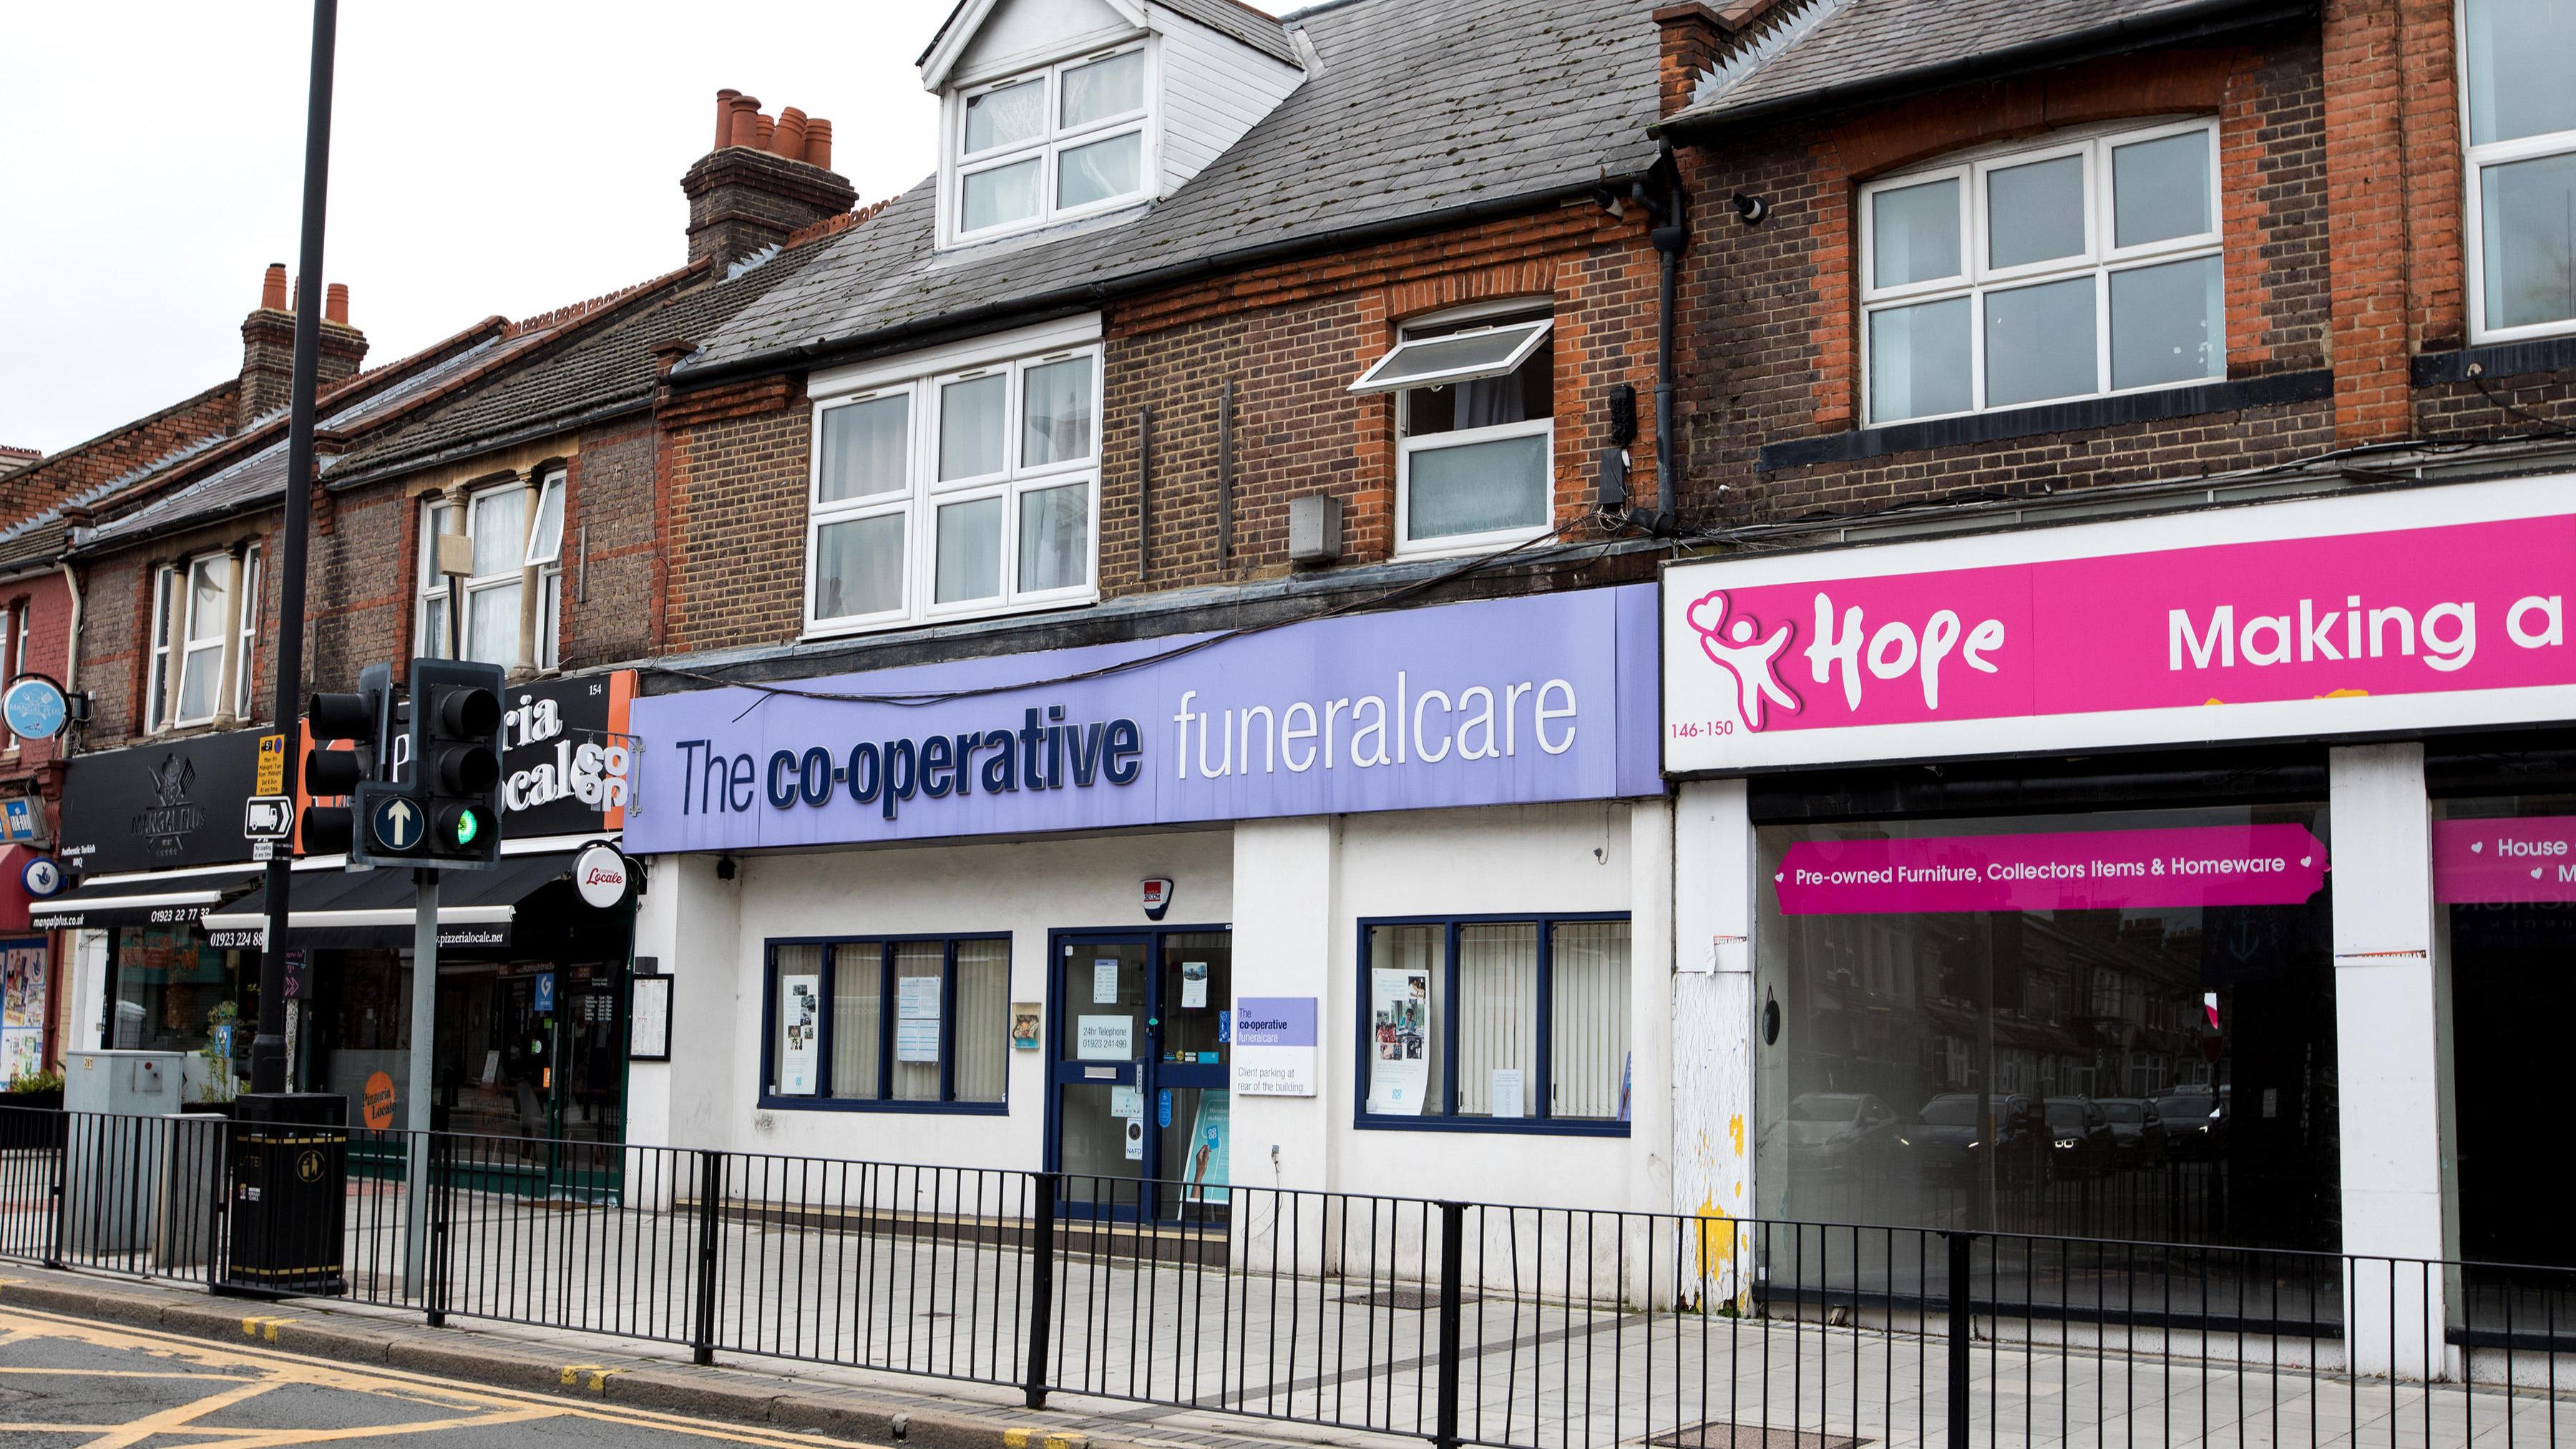 Images Co-op Funeralcare, St Albans Rd.